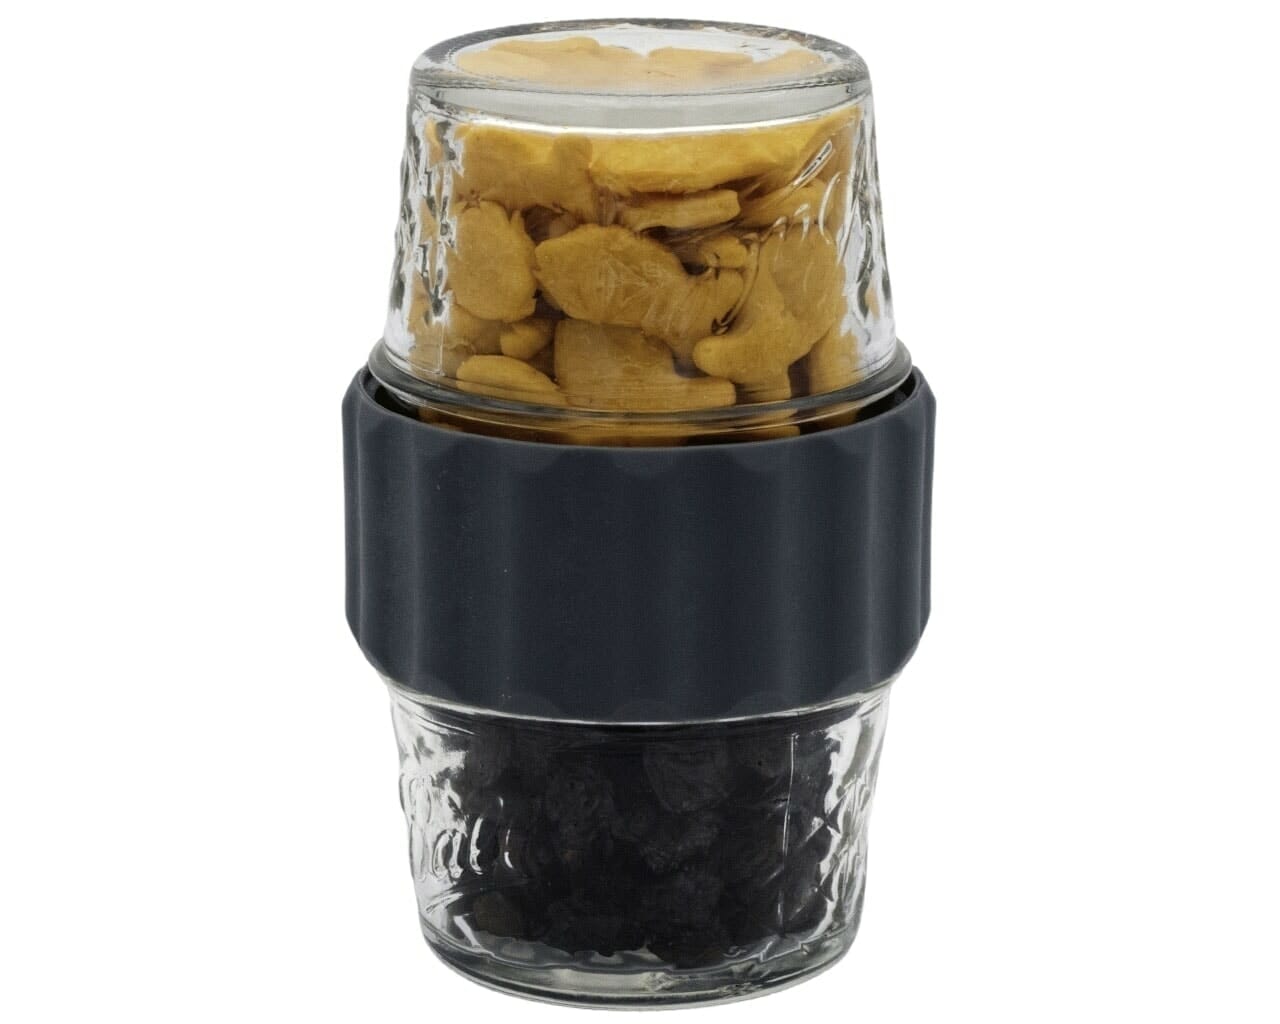 http://masonjarlifestyle.com/cdn/shop/files/2-in-1-lid-connect-two-regular-mouth-mason-jars-charcoal-gray-silicone-seals-goldfish-crackers-raisins-snack.jpg?v=1695767181